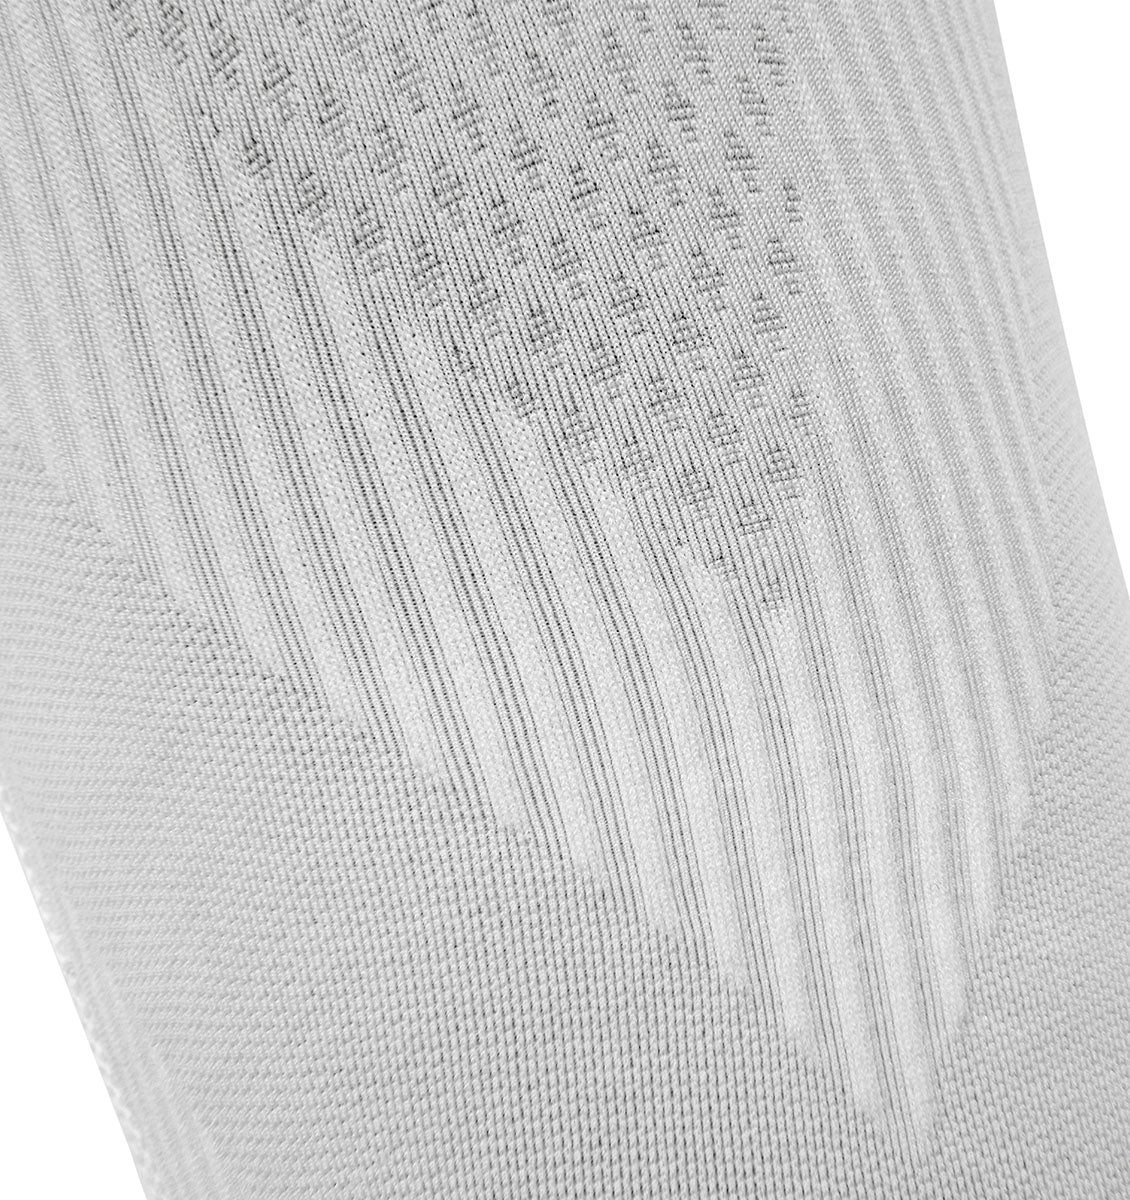 adidas Compression Calf Sleeves - White - 5